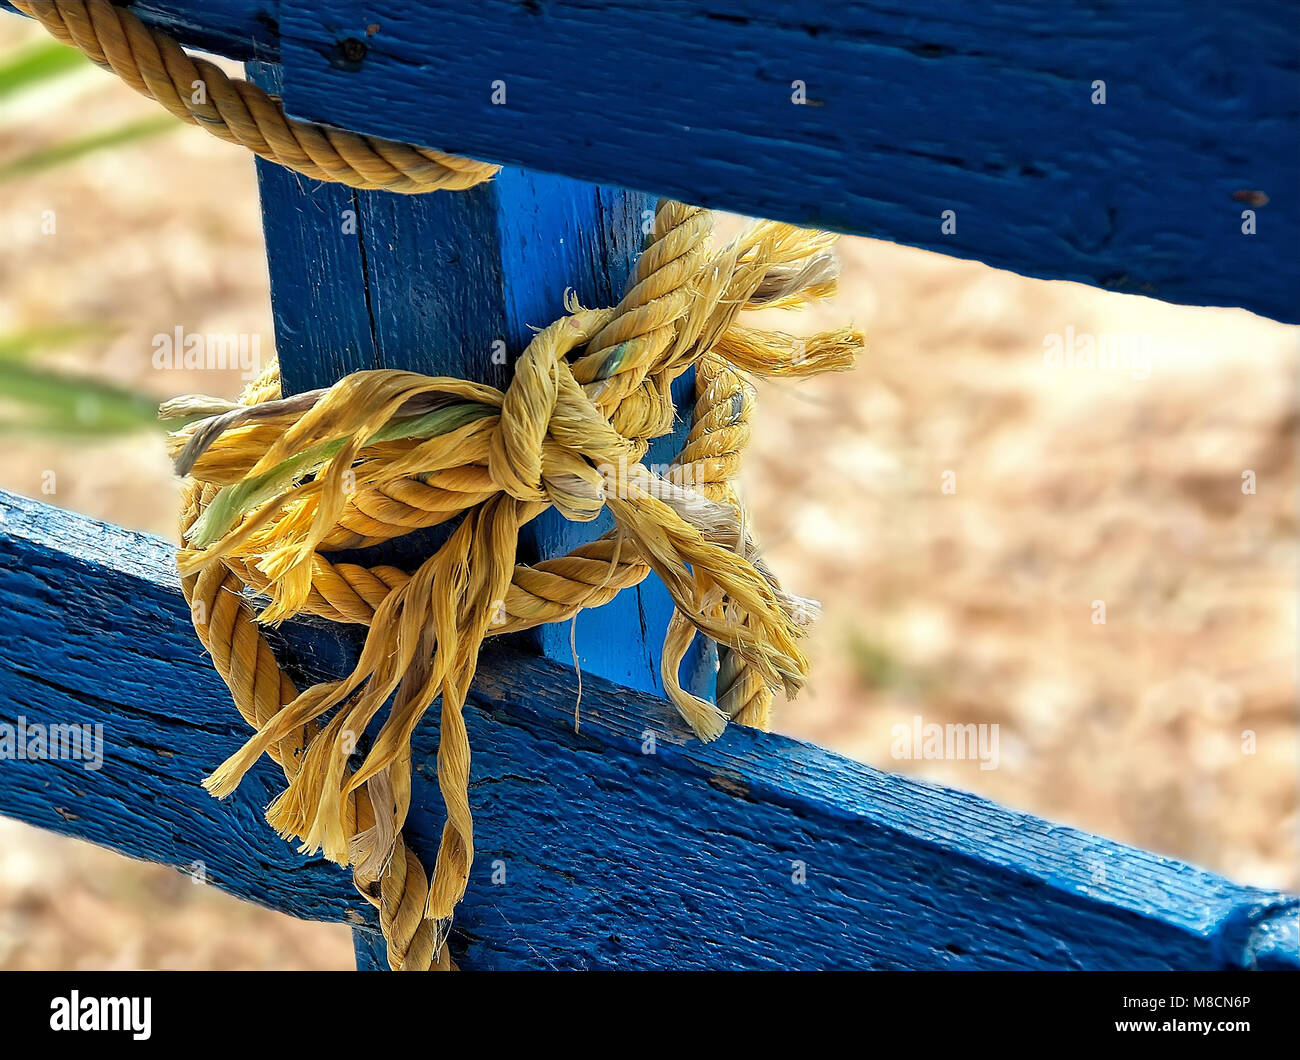 Thick jute yellow rope hanging from blue painted wooden planks Stock Photo  - Alamy